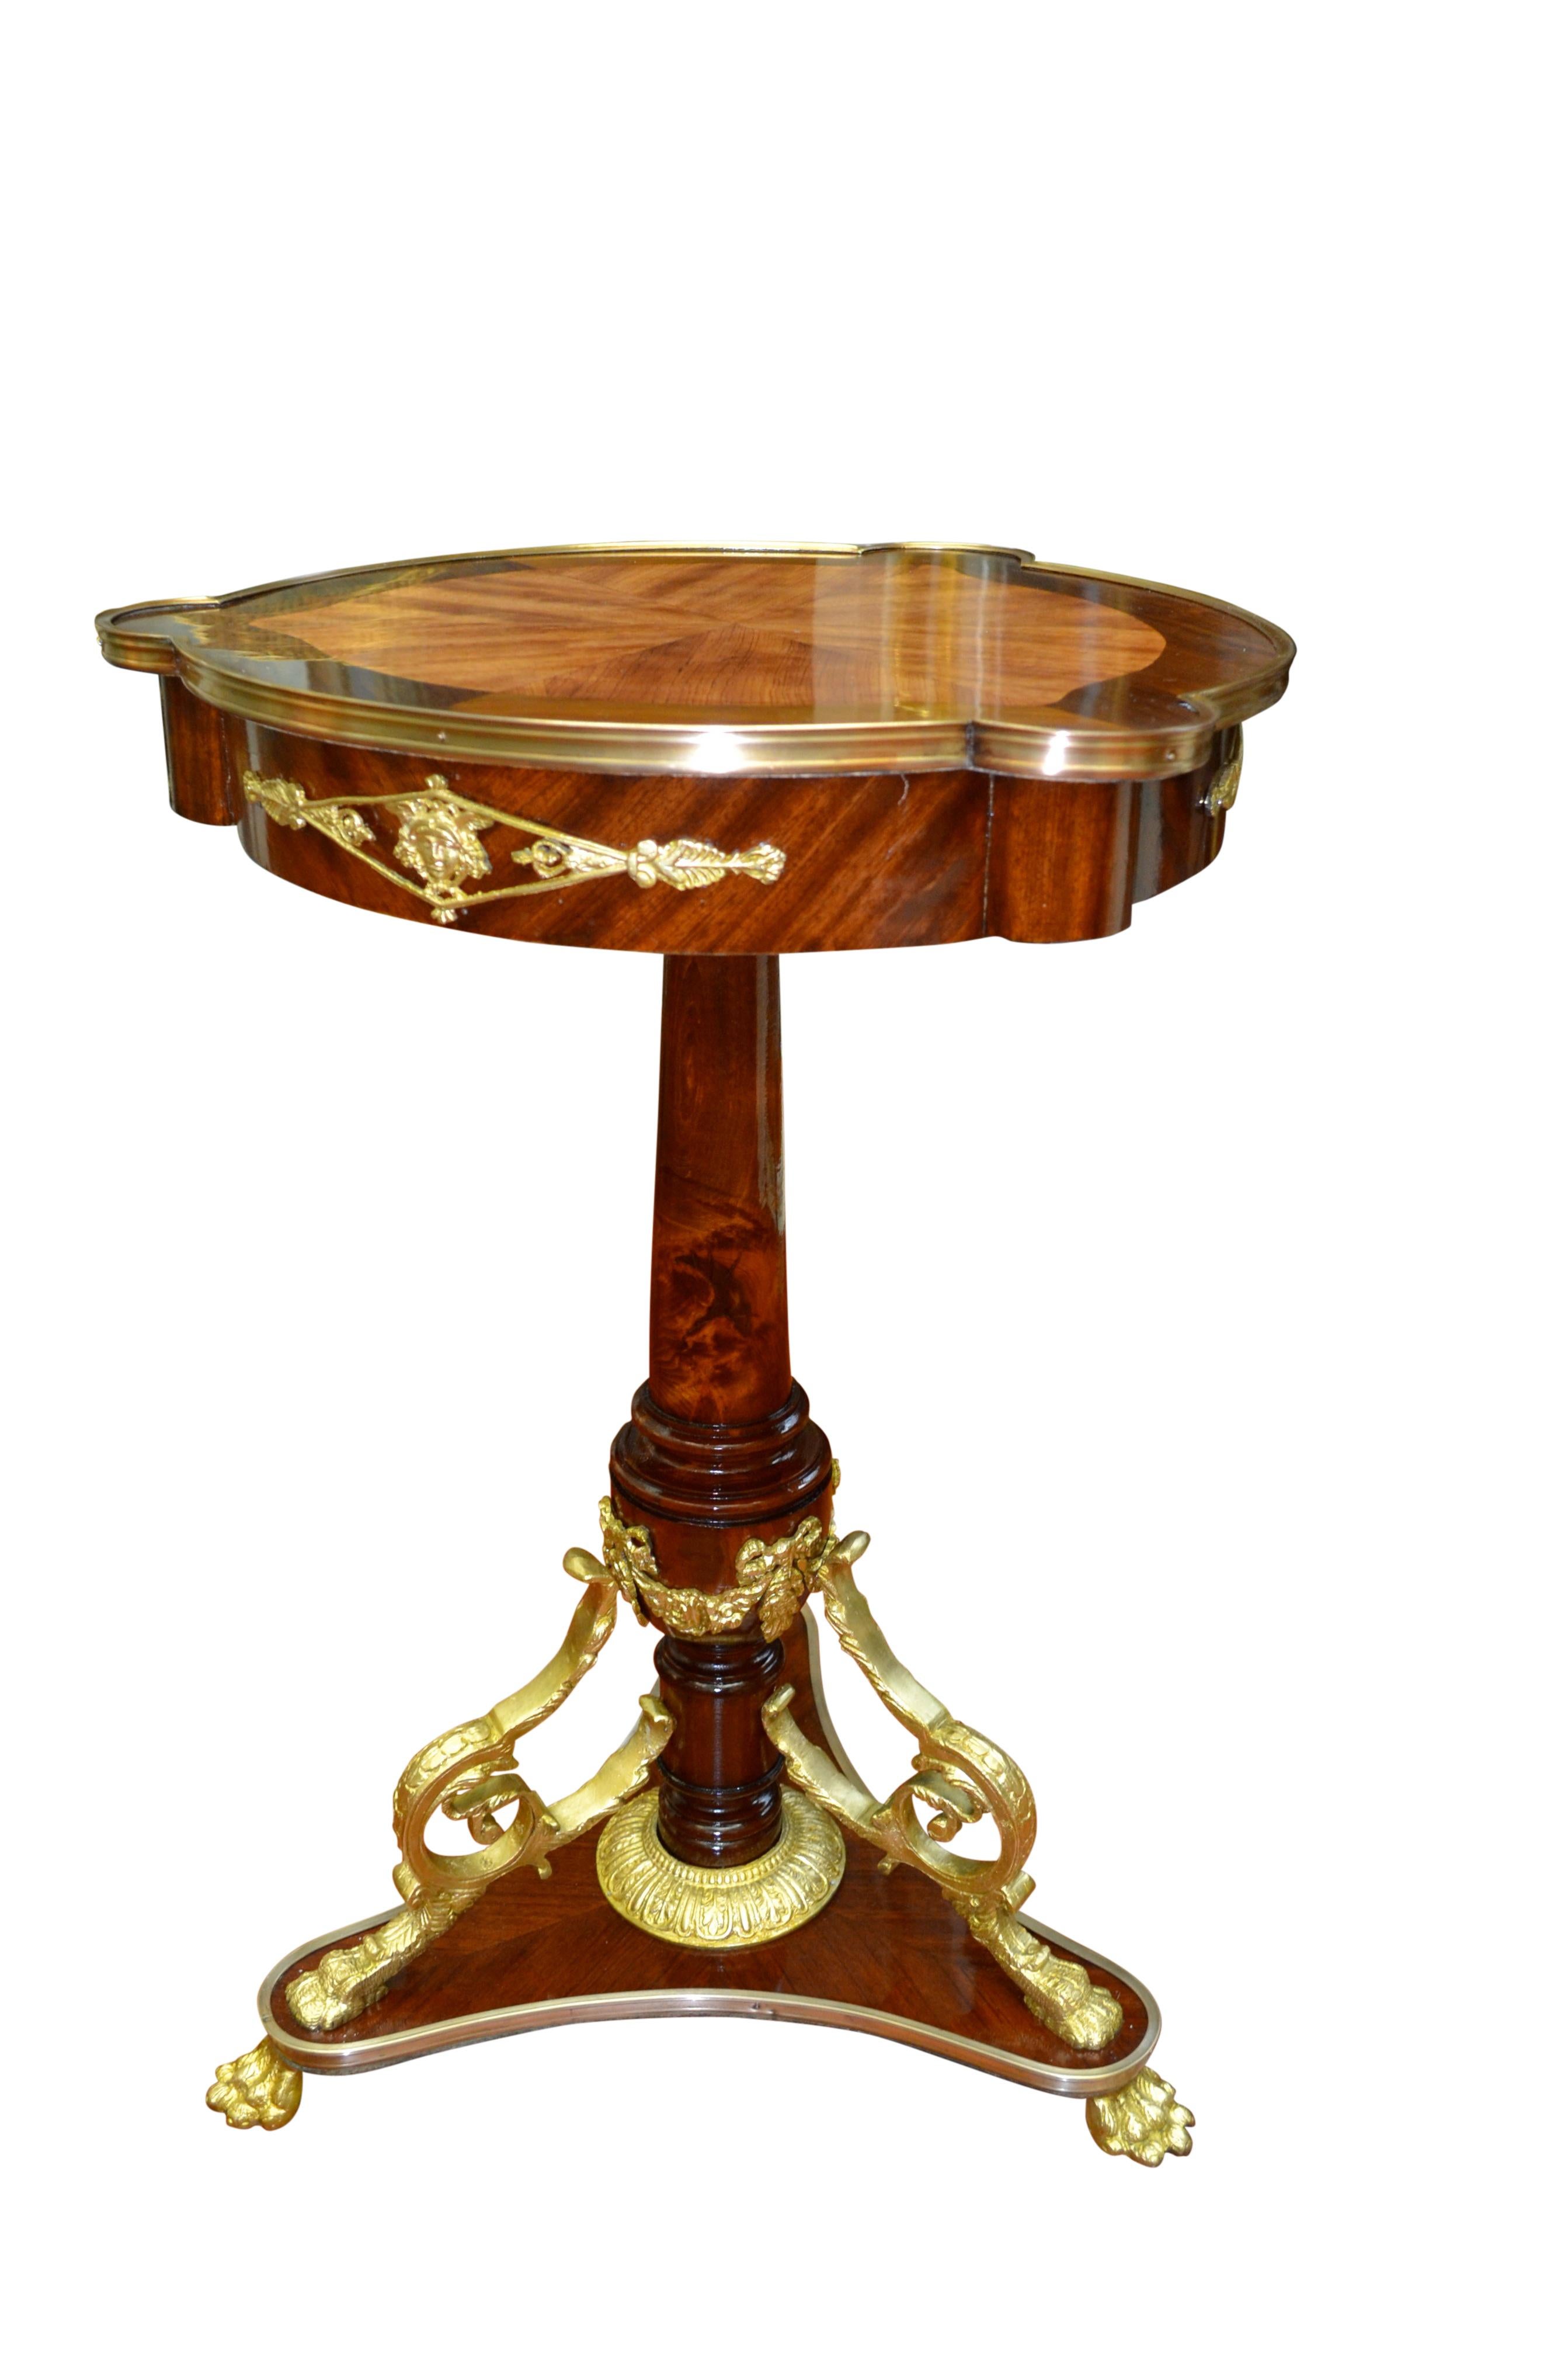 A round decorative French Napoleon III occasional pedestal table in mahogany with an inlaid tulipwood and mahogany bordered top with gilt bronze banding. The apron has decorative gilded bronze Empire style mounts to three sides. The top rests on a